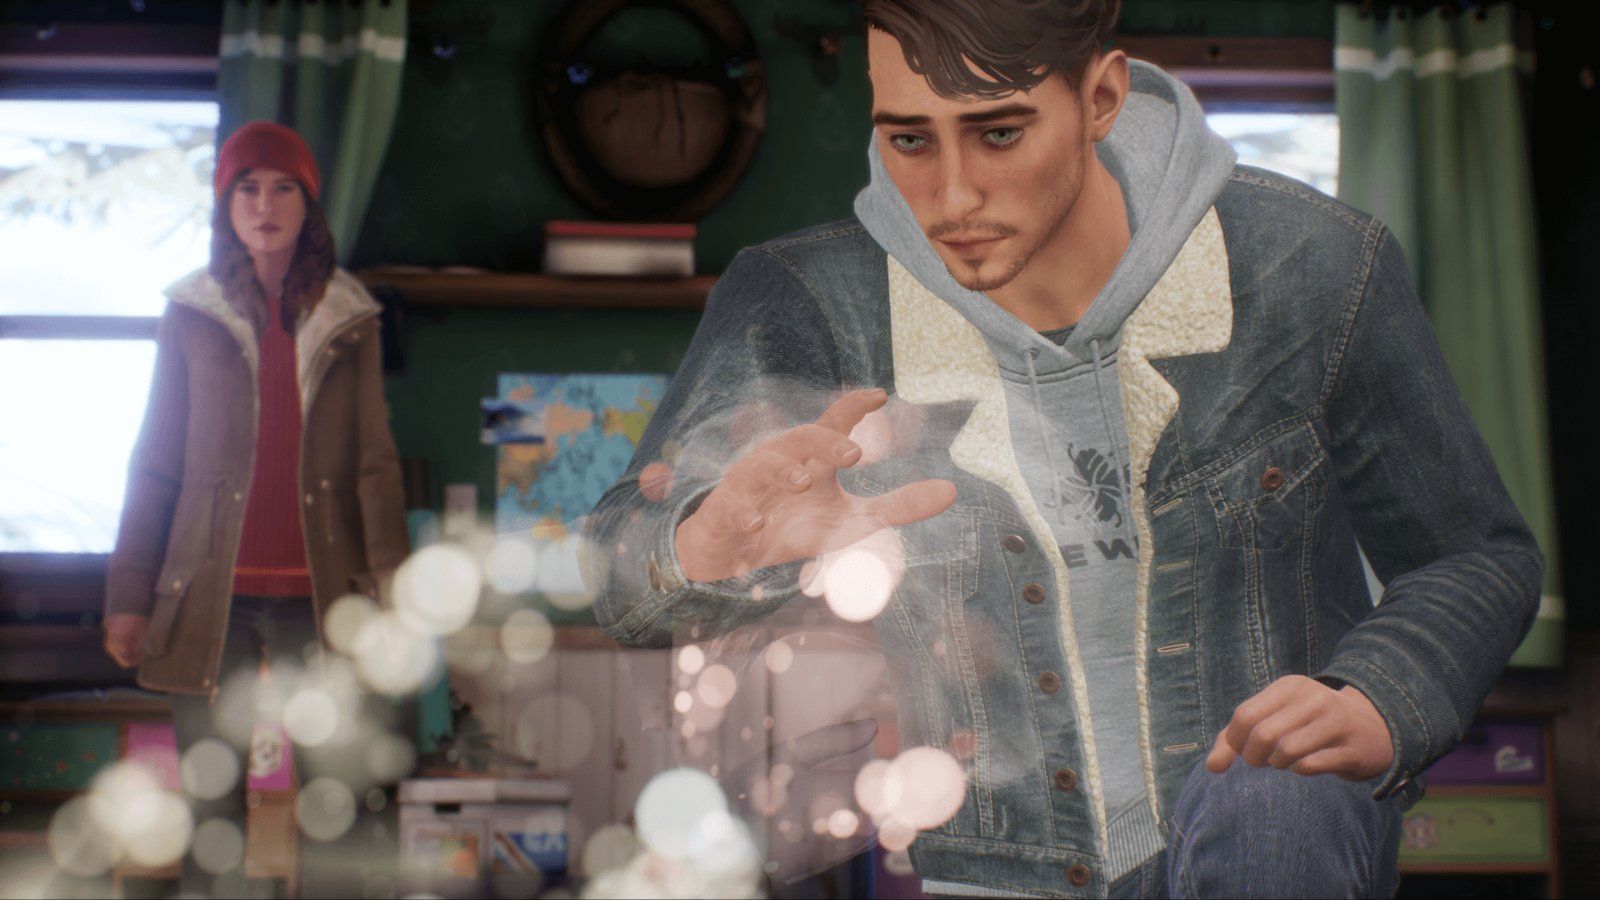 Life is Strange' dev's upcoming game centers on twins and trans identity